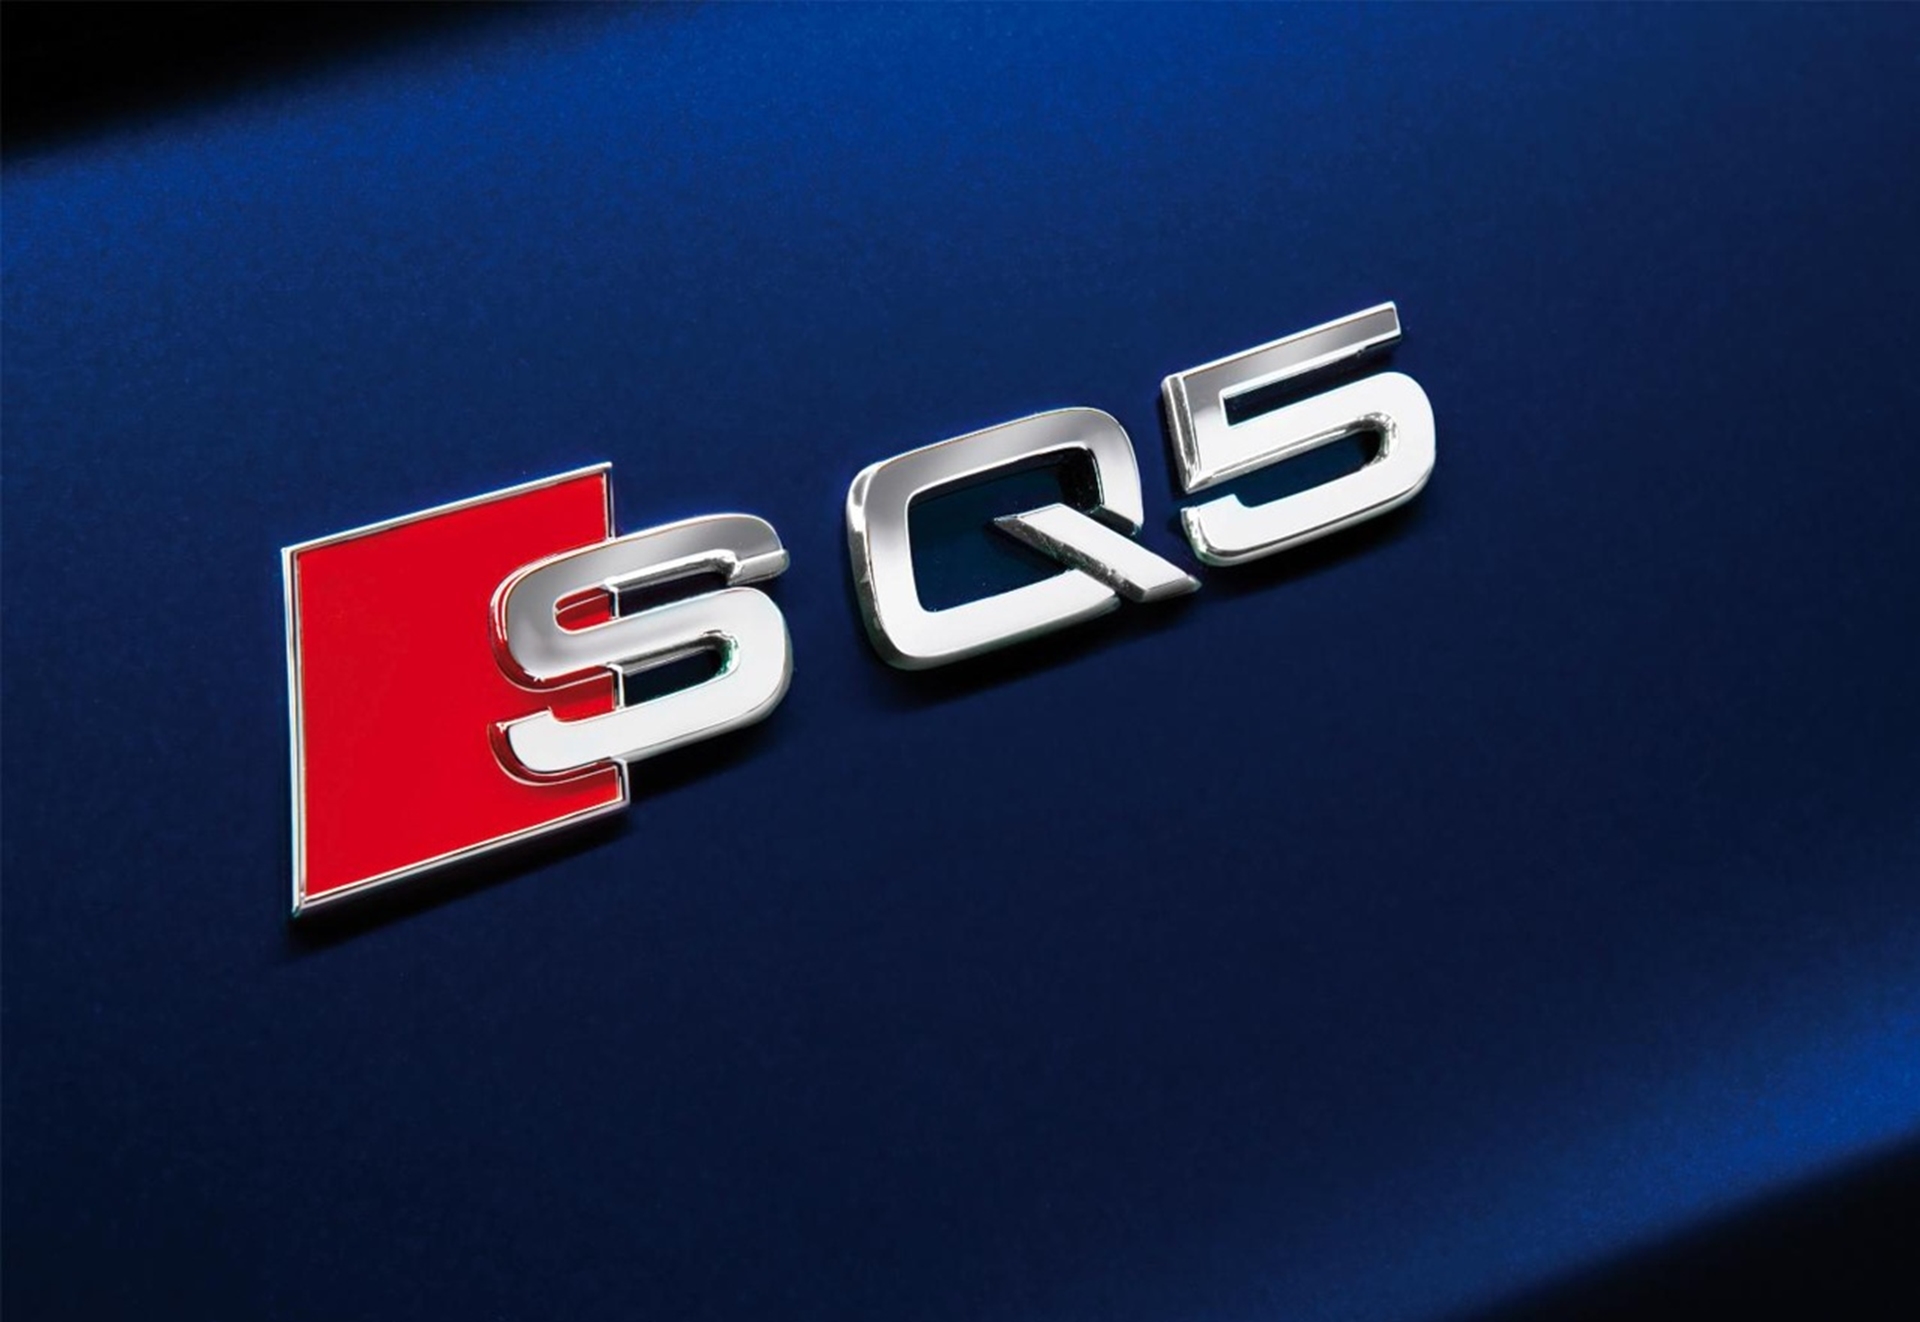 AUDI SQ5 TDI LAUNCHES IN LE MANS AS FIRST EVER DIESEL-POWERED S MODEL